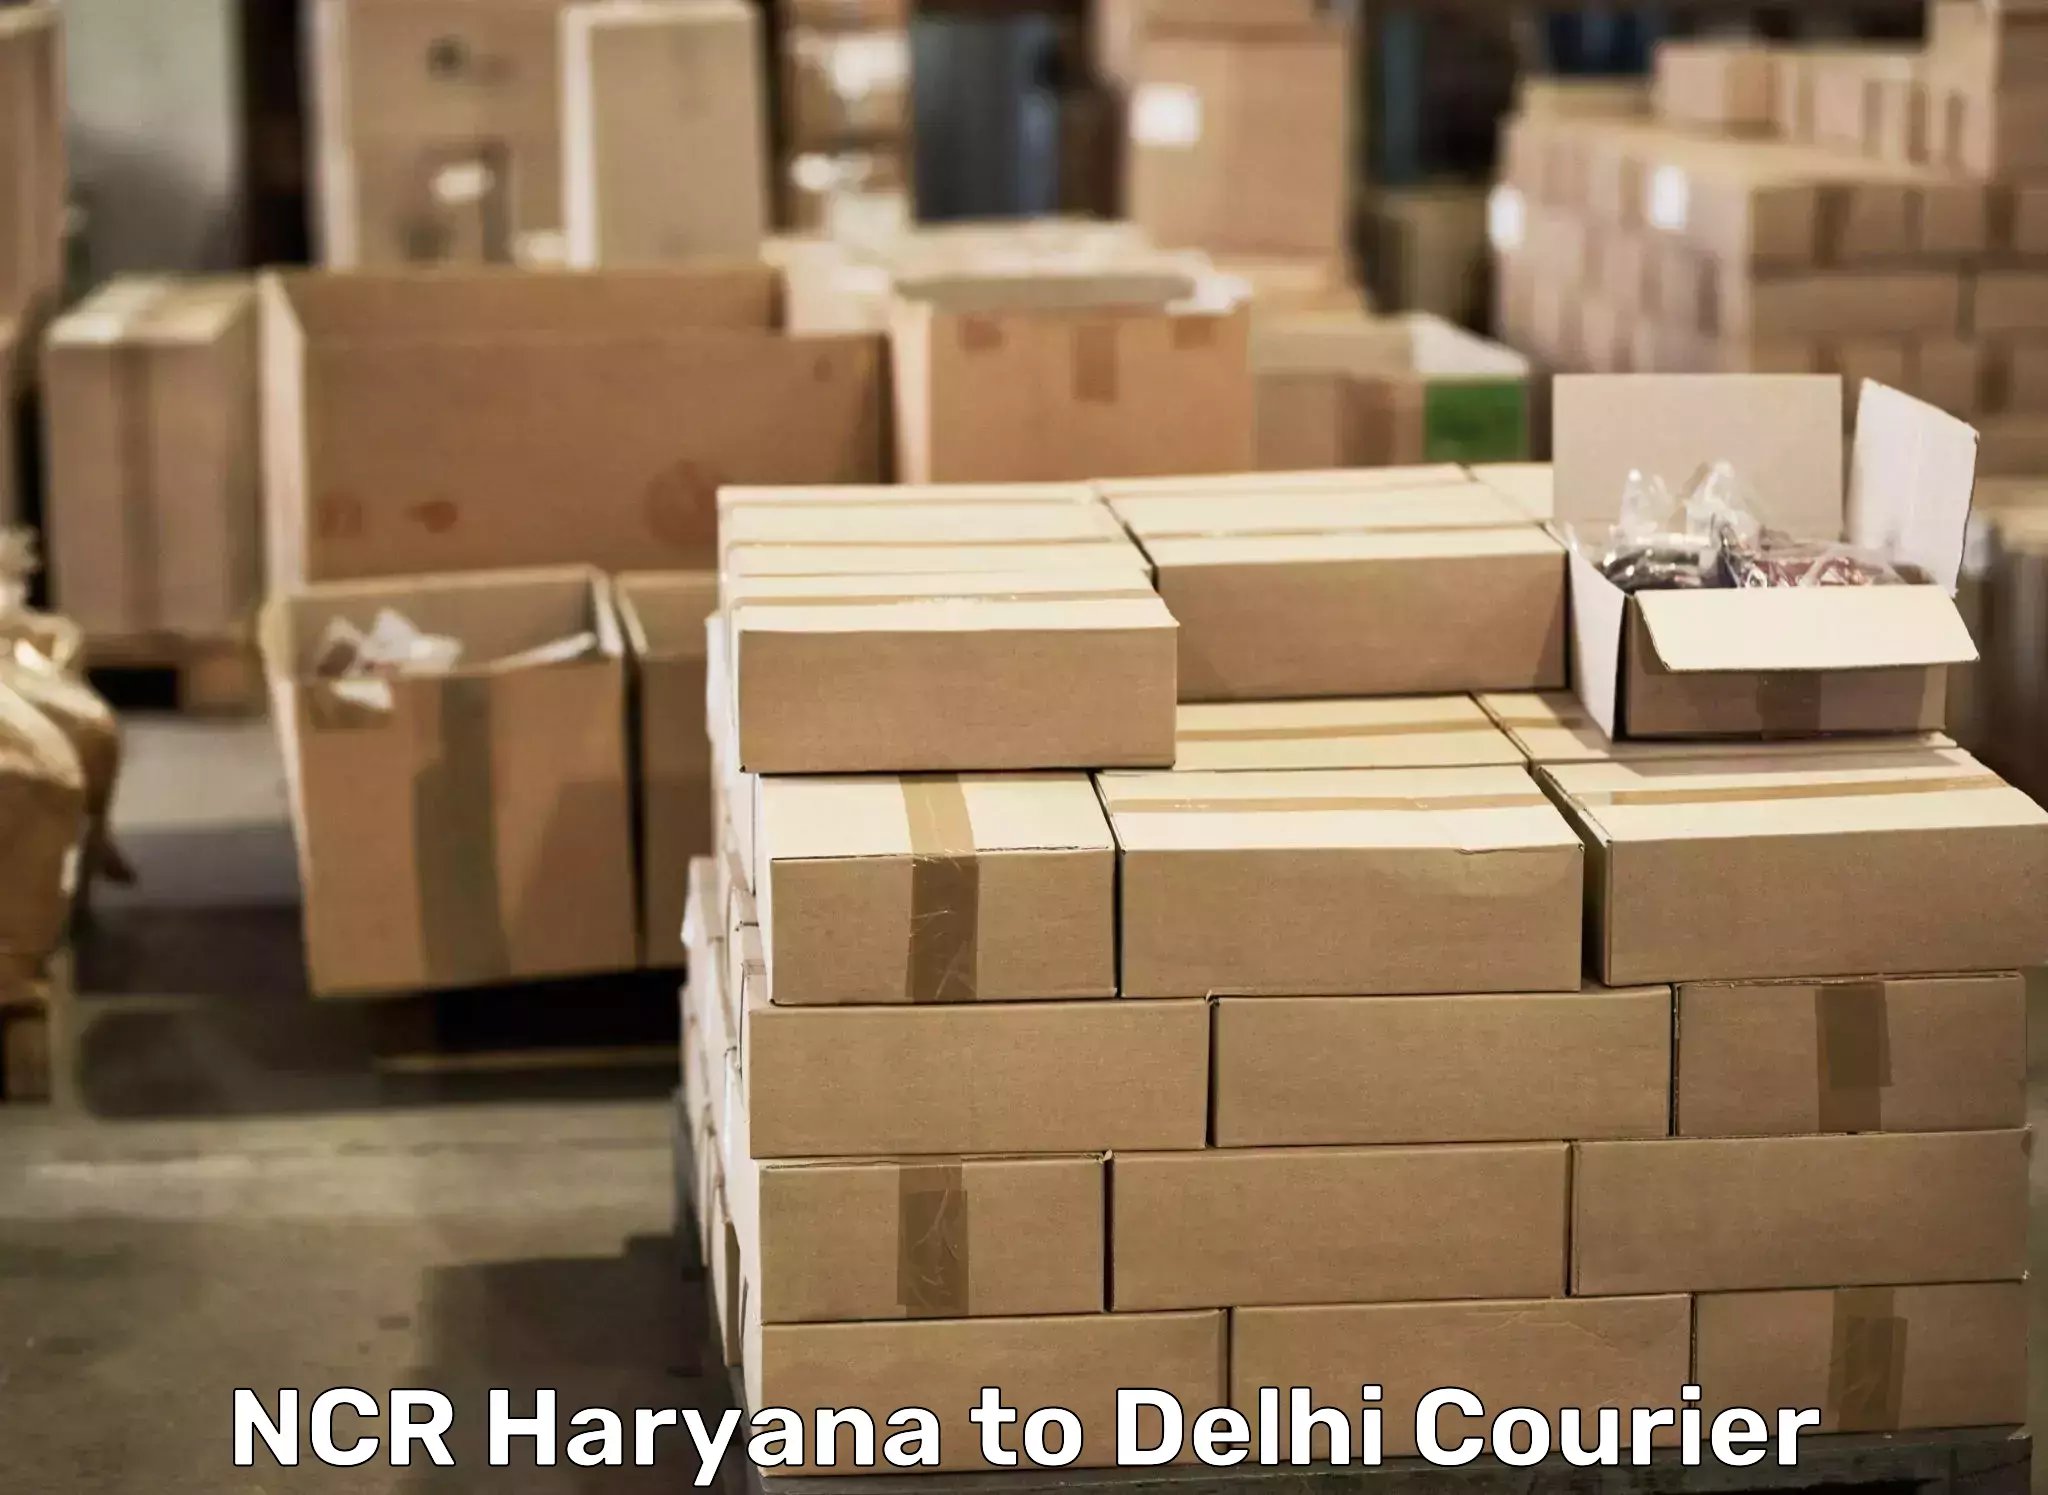 Quality relocation services NCR Haryana to East Delhi